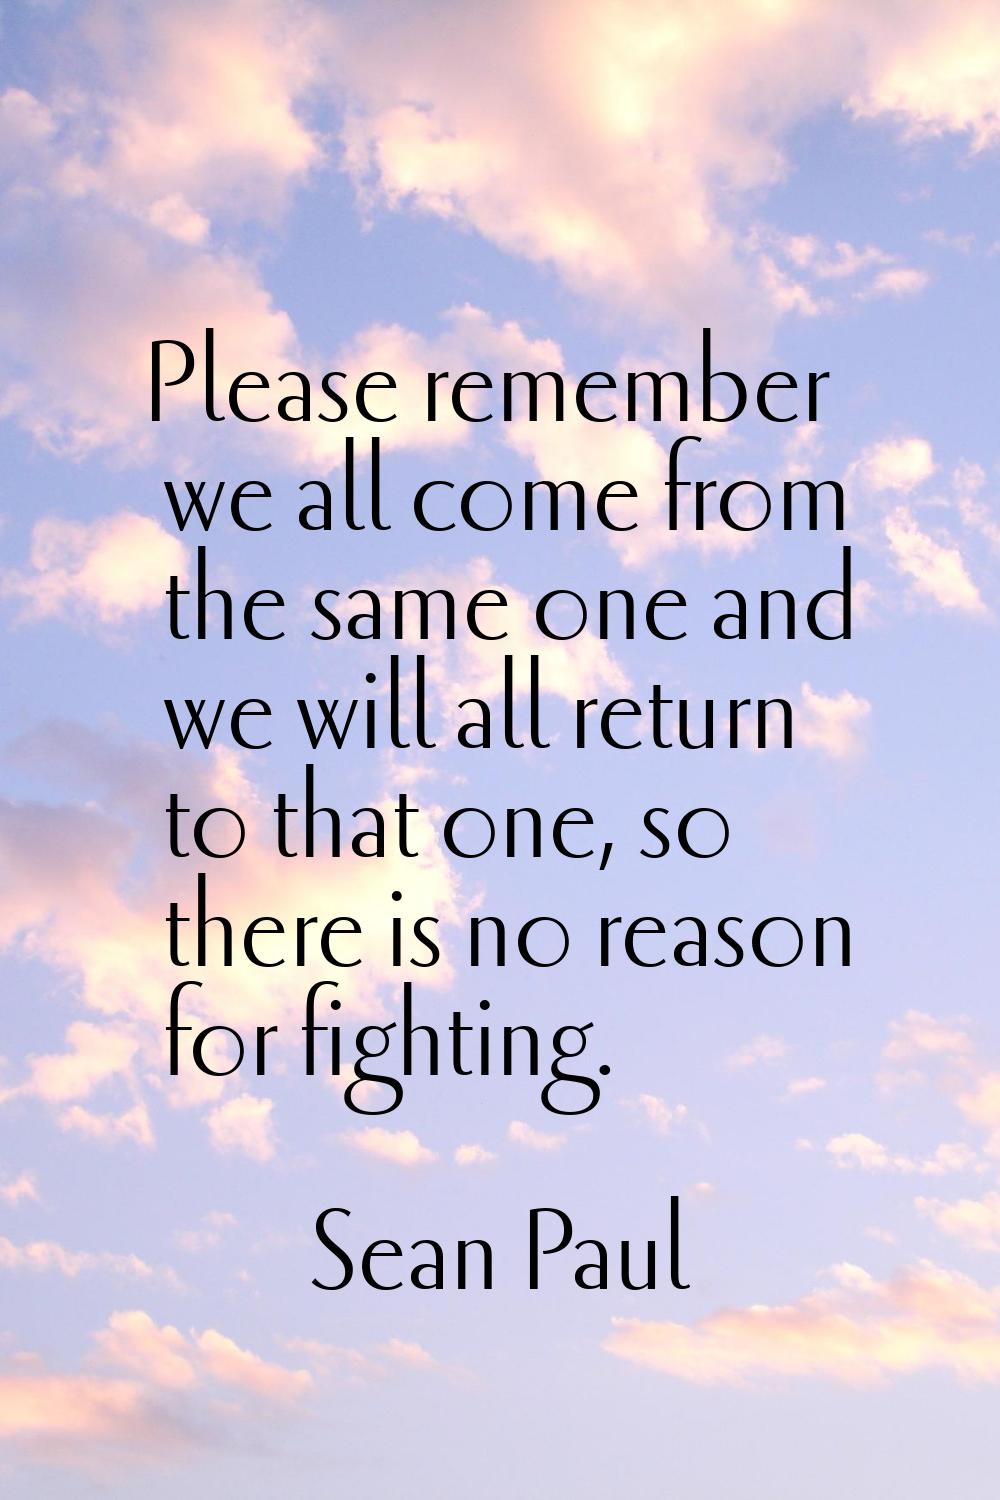 Please remember we all come from the same one and we will all return to that one, so there is no re